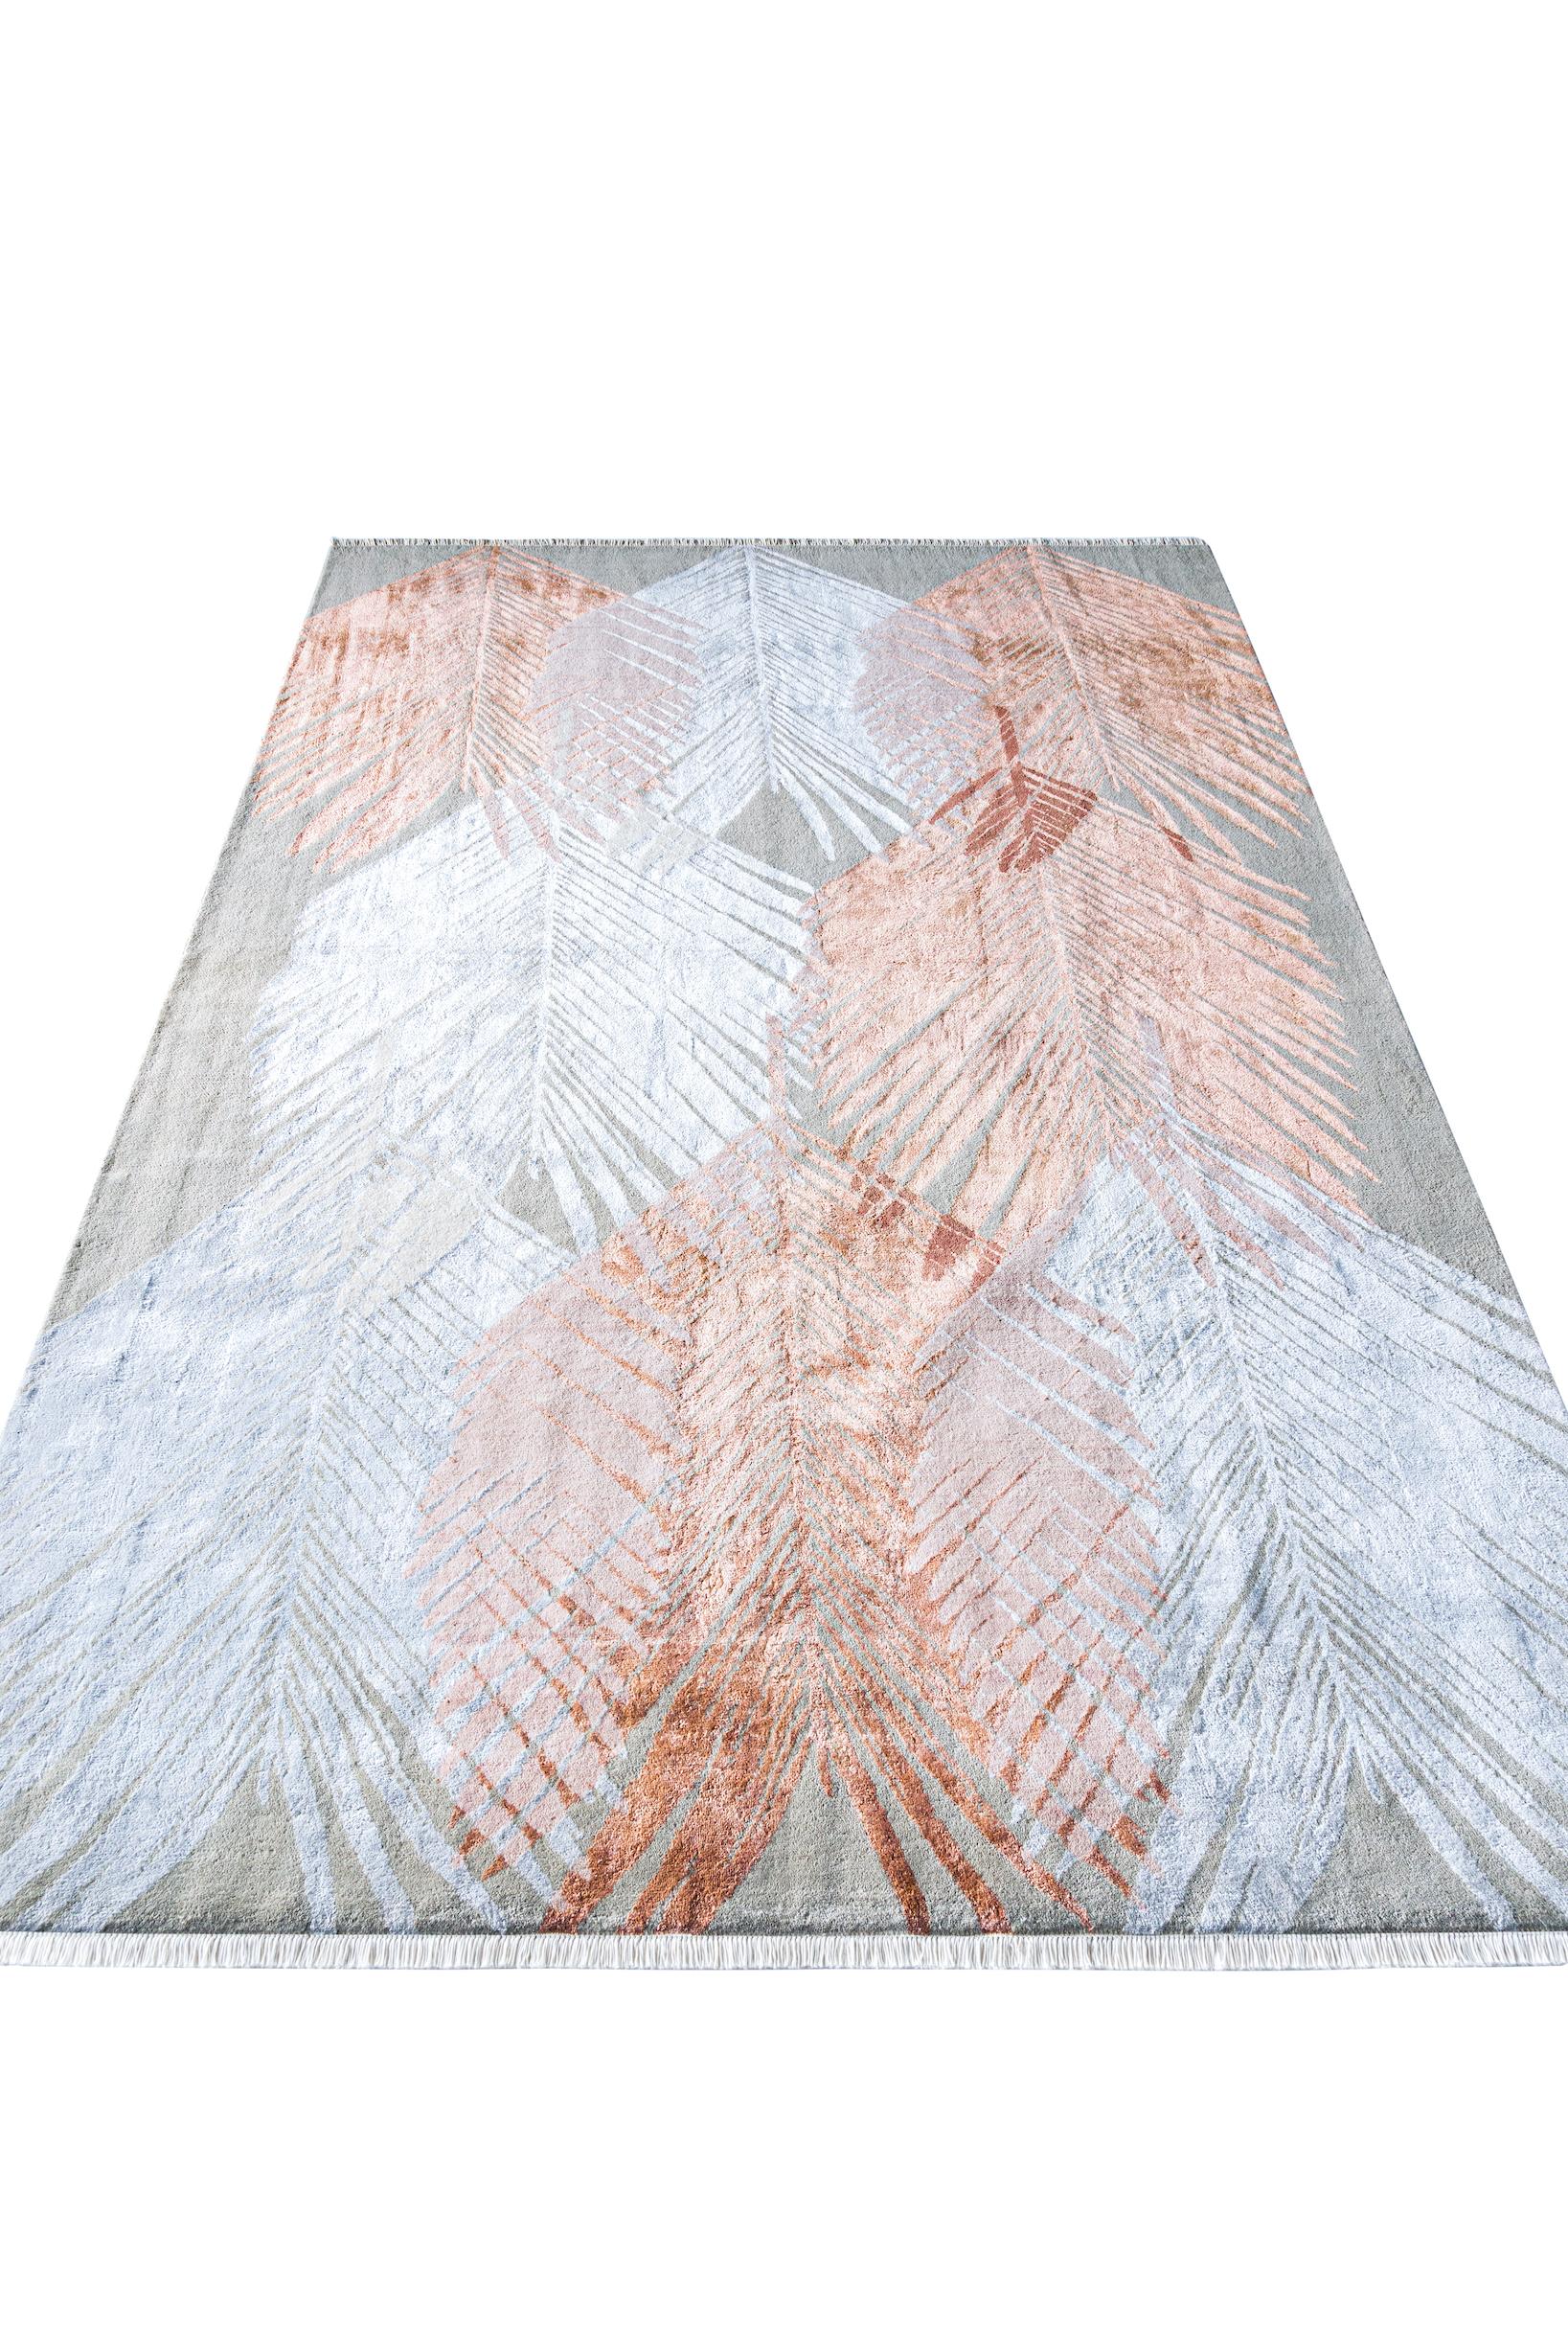 Art Deco Kahhal Looms Cycas Hand-Knotted 350x250cm Rug by JAM BY HEDAYAT For Sale